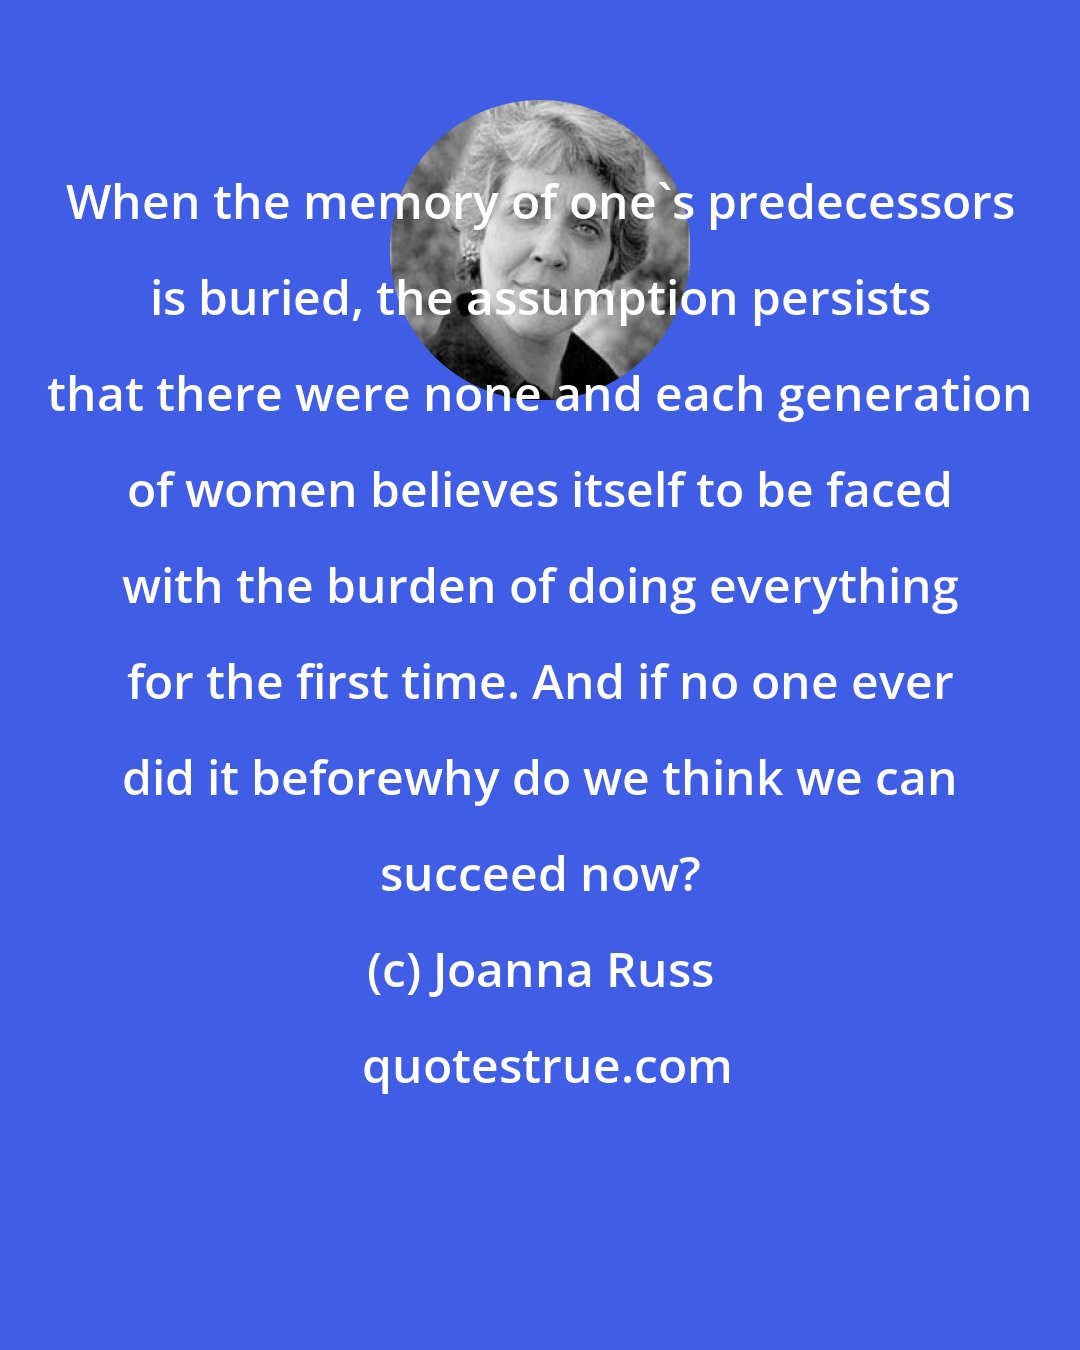 Joanna Russ: When the memory of one's predecessors is buried, the assumption persists that there were none and each generation of women believes itself to be faced with the burden of doing everything for the first time. And if no one ever did it beforewhy do we think we can succeed now?